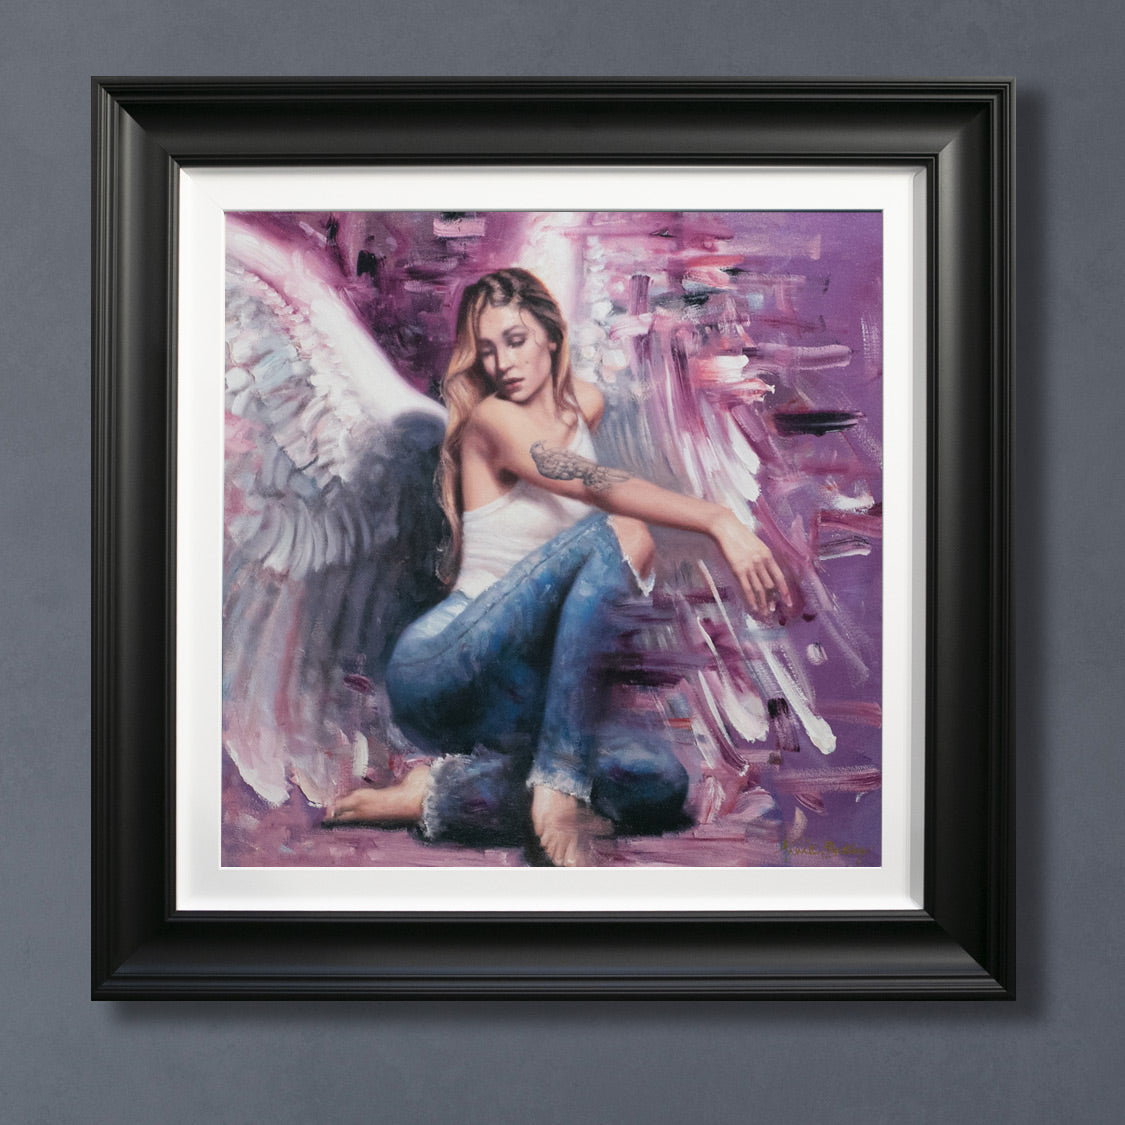 Hamish Blakely - 'The Dreamer' - Framed Limited Edition